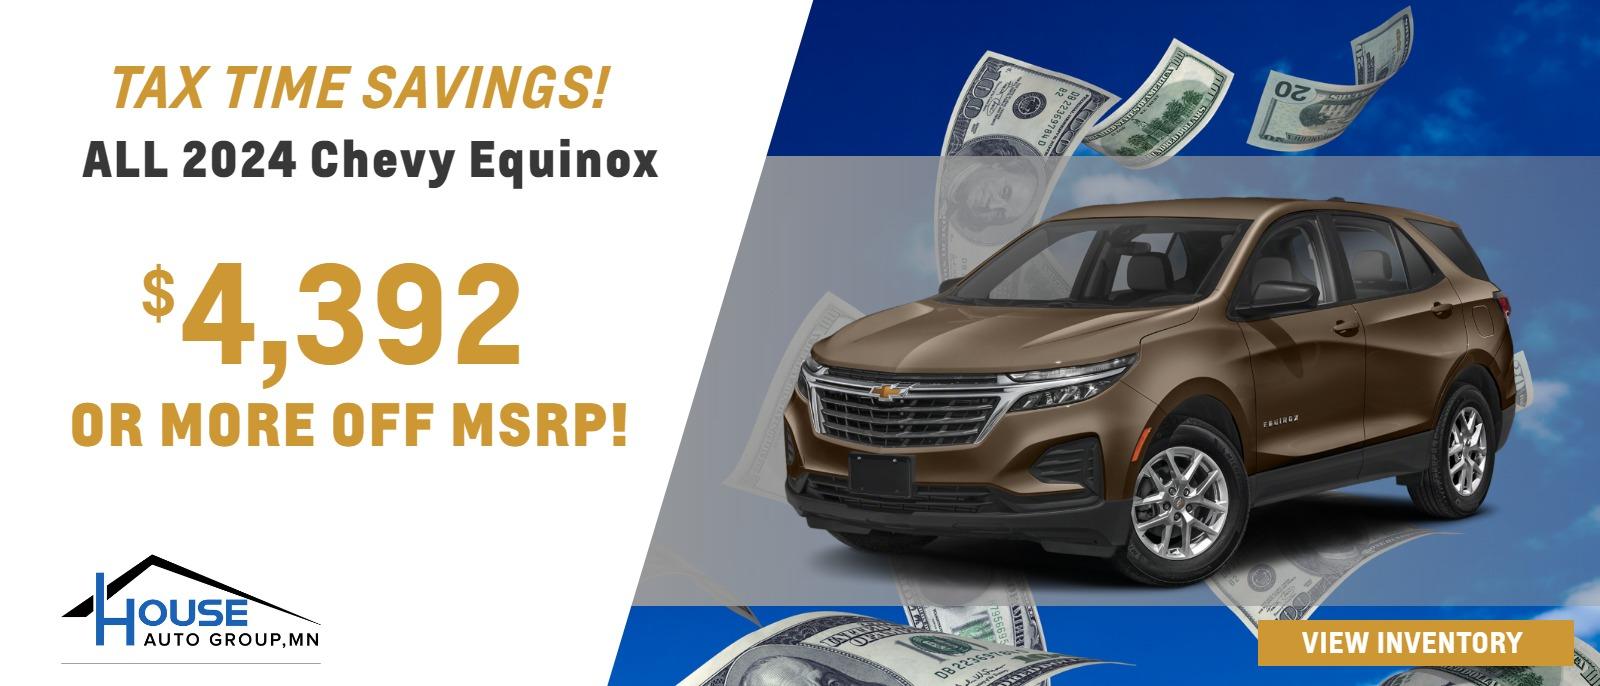 ALL 2024 Chevy Equinox - $4,392 Or More Off MSRP! (Includes $1,000 bonus for owners/lessees of 2010 or newer Chevrolet models.)